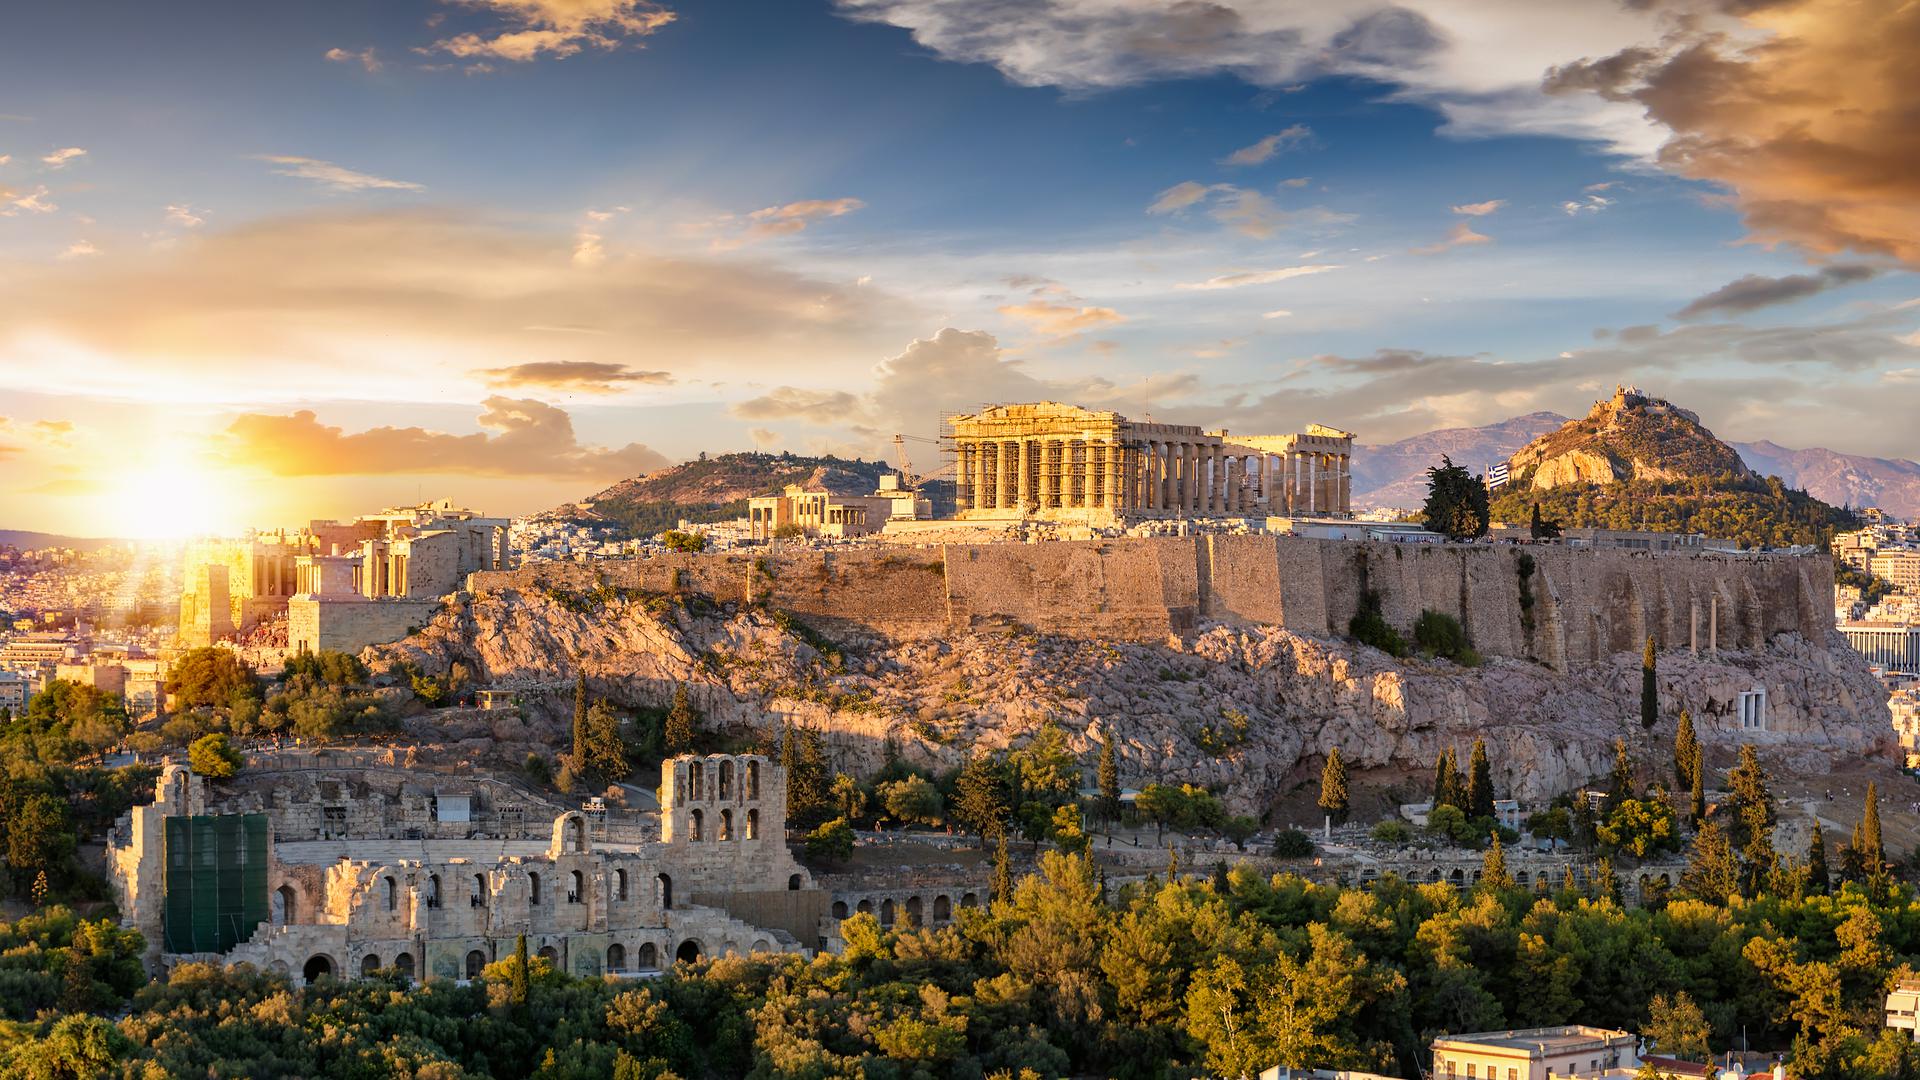 Greece is the country to visit if you like history and want to see archeological sites 